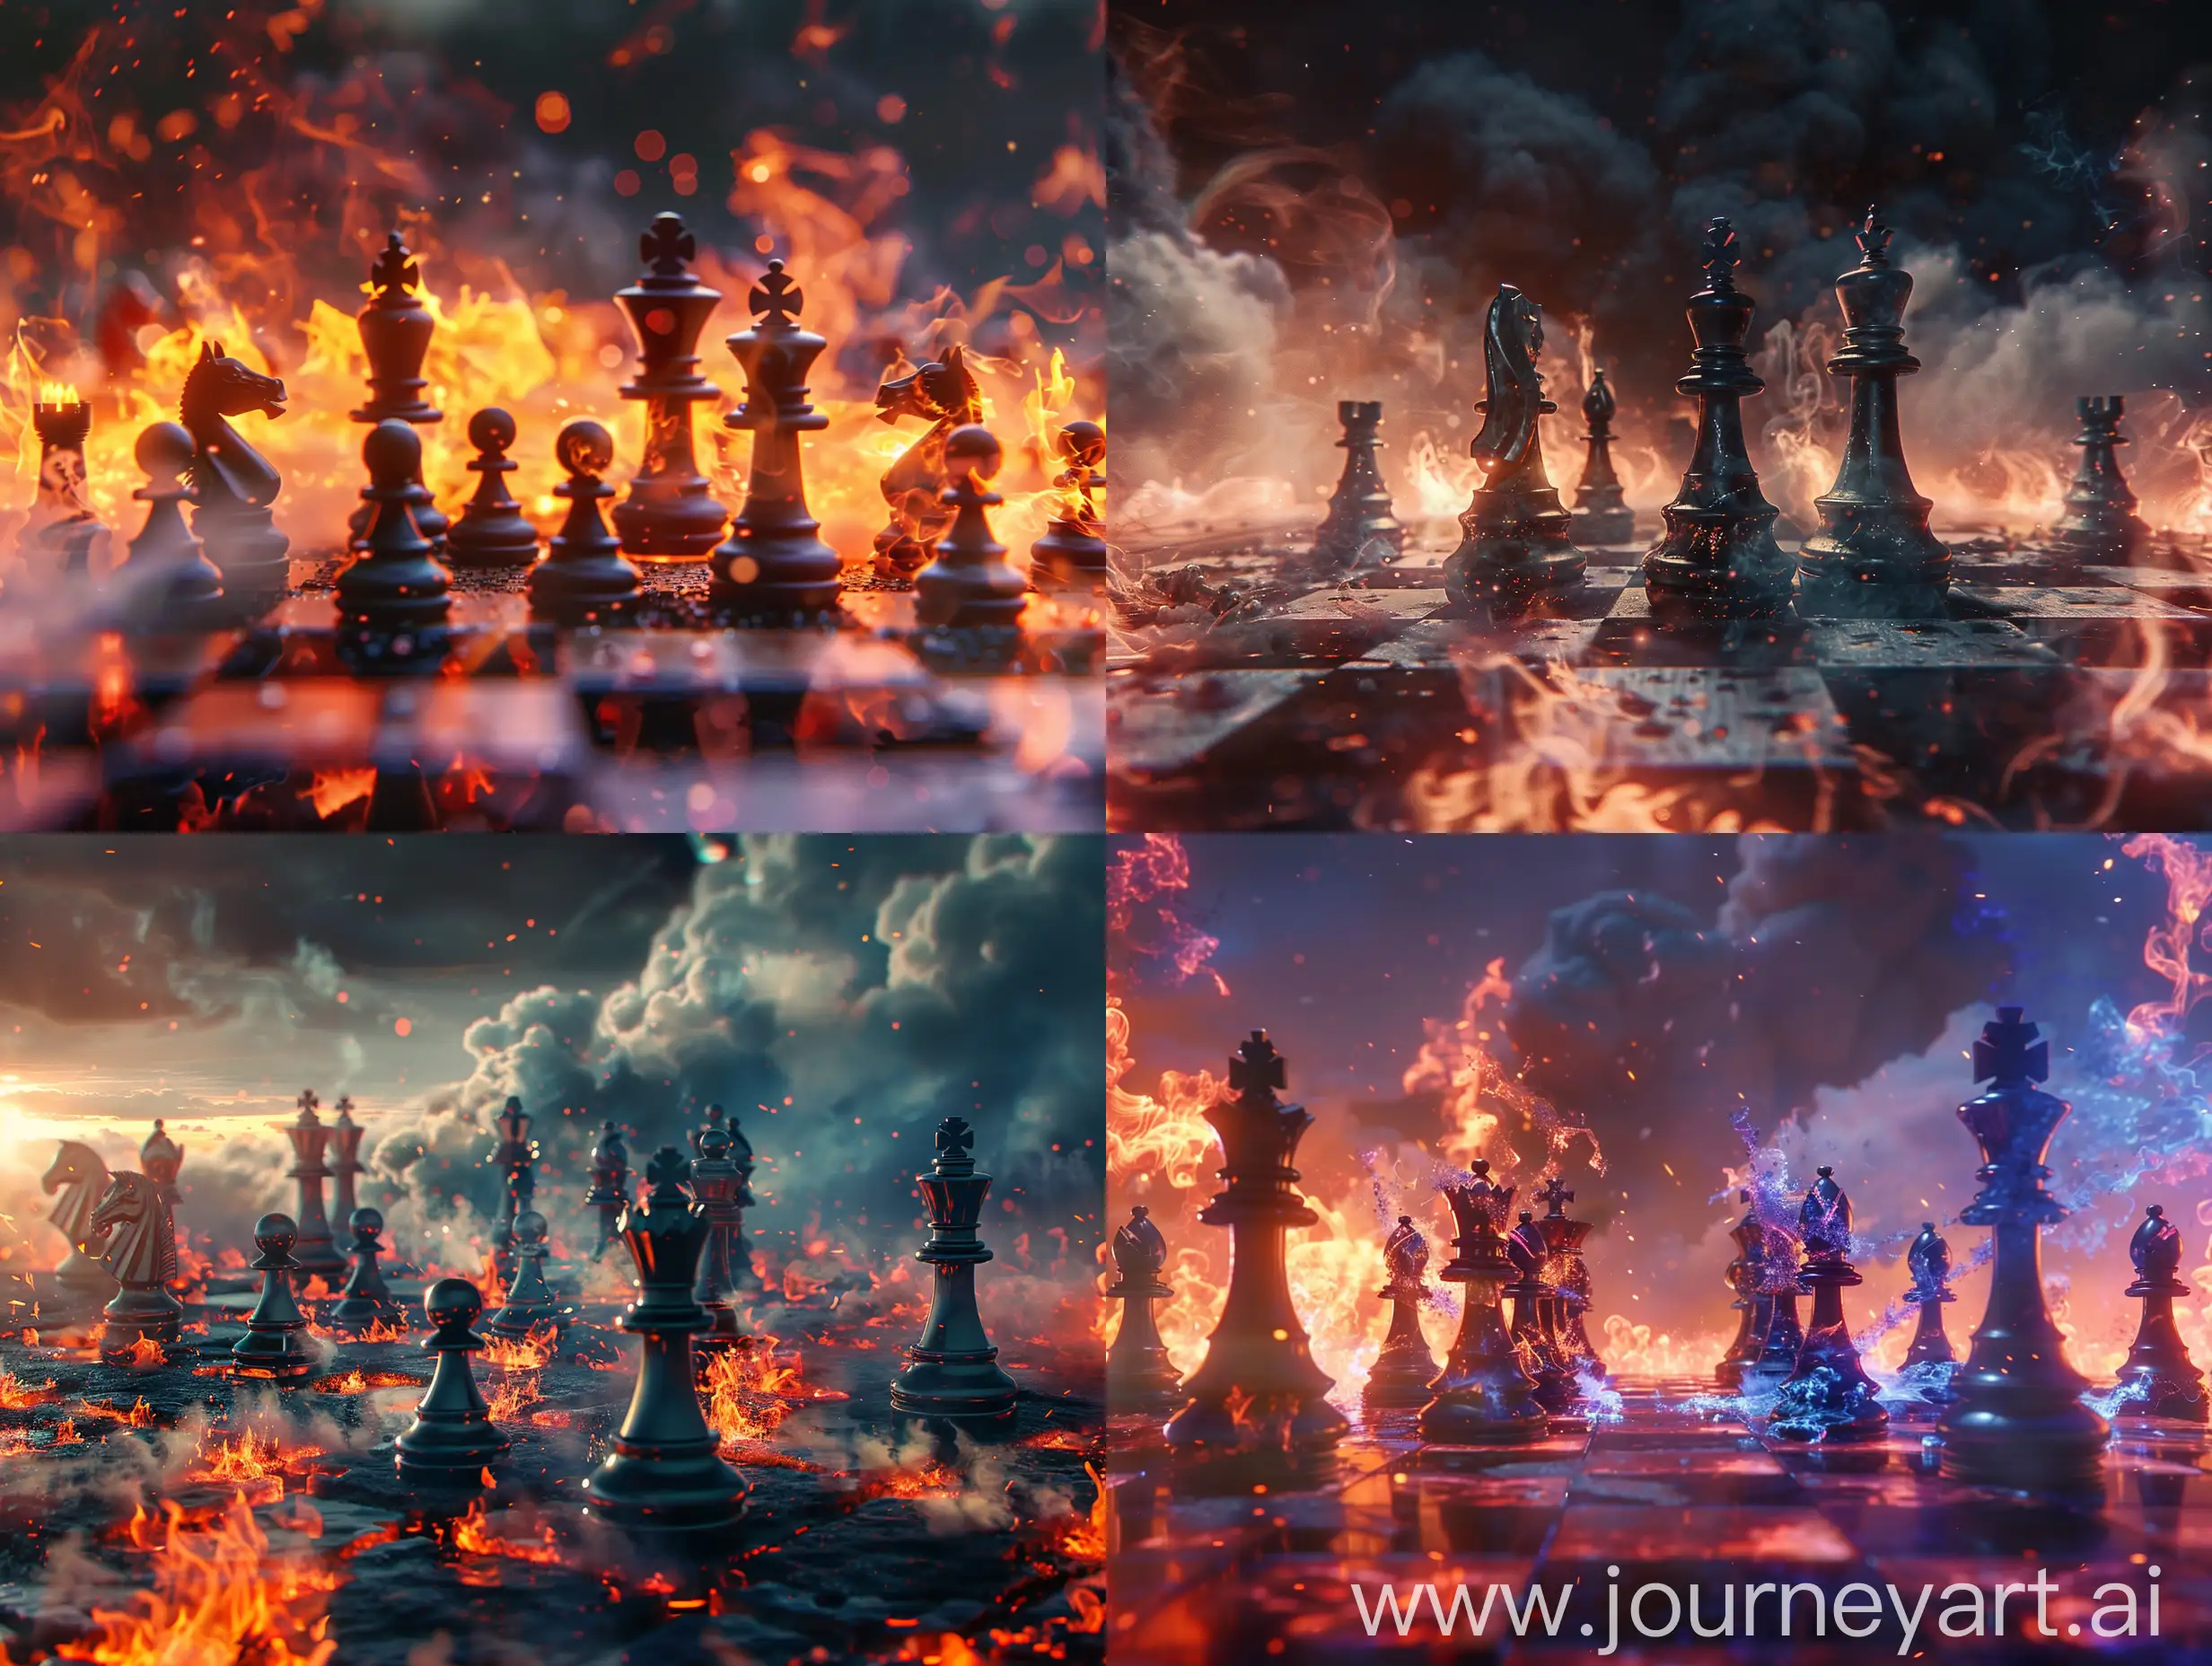 Fiery-Battle-of-Animated-Chess-Pieces-on-Cinematic-Chess-Field